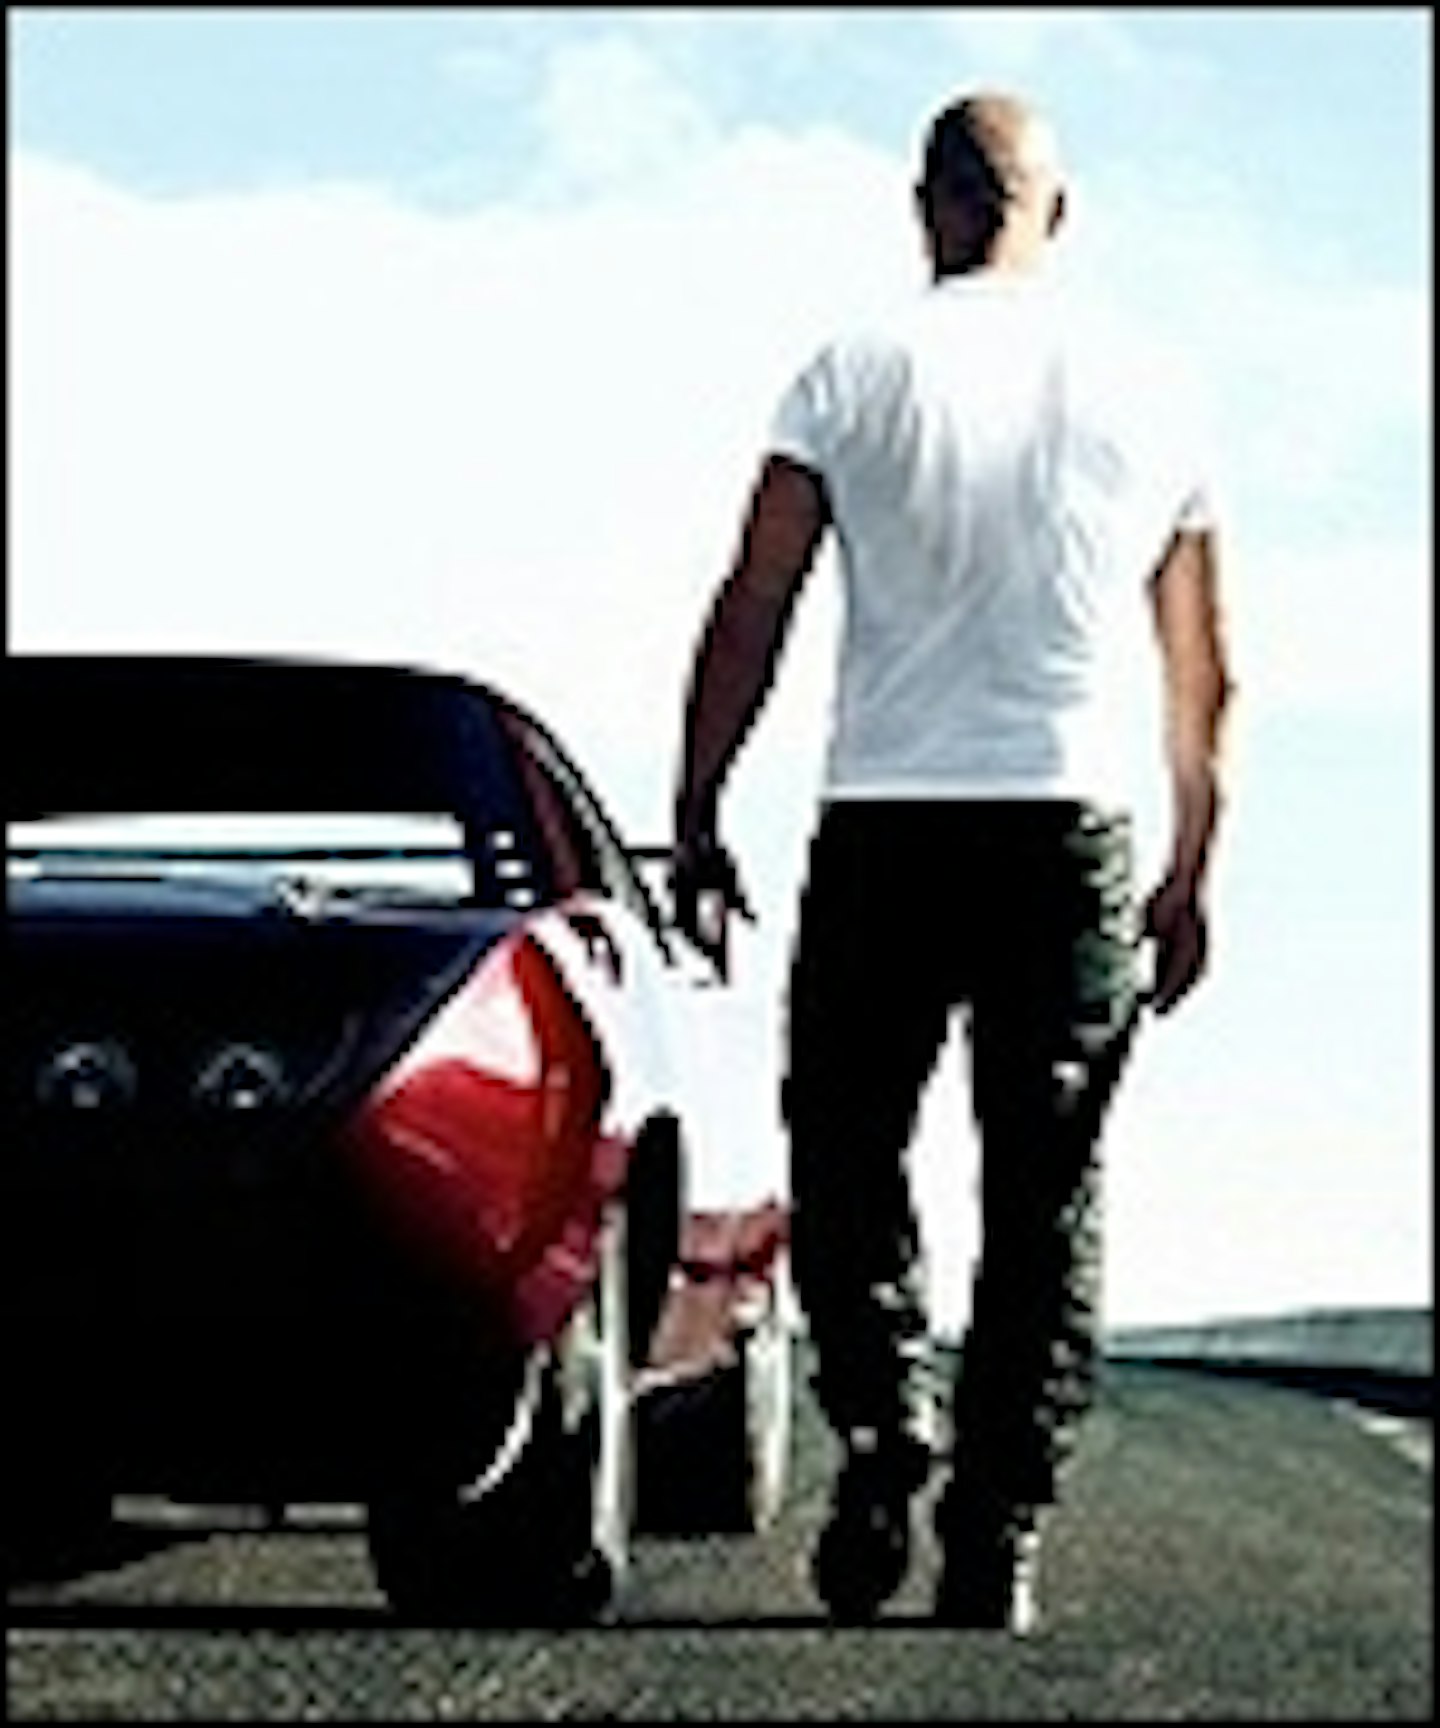 Fast & Furious 7 Is Not The End